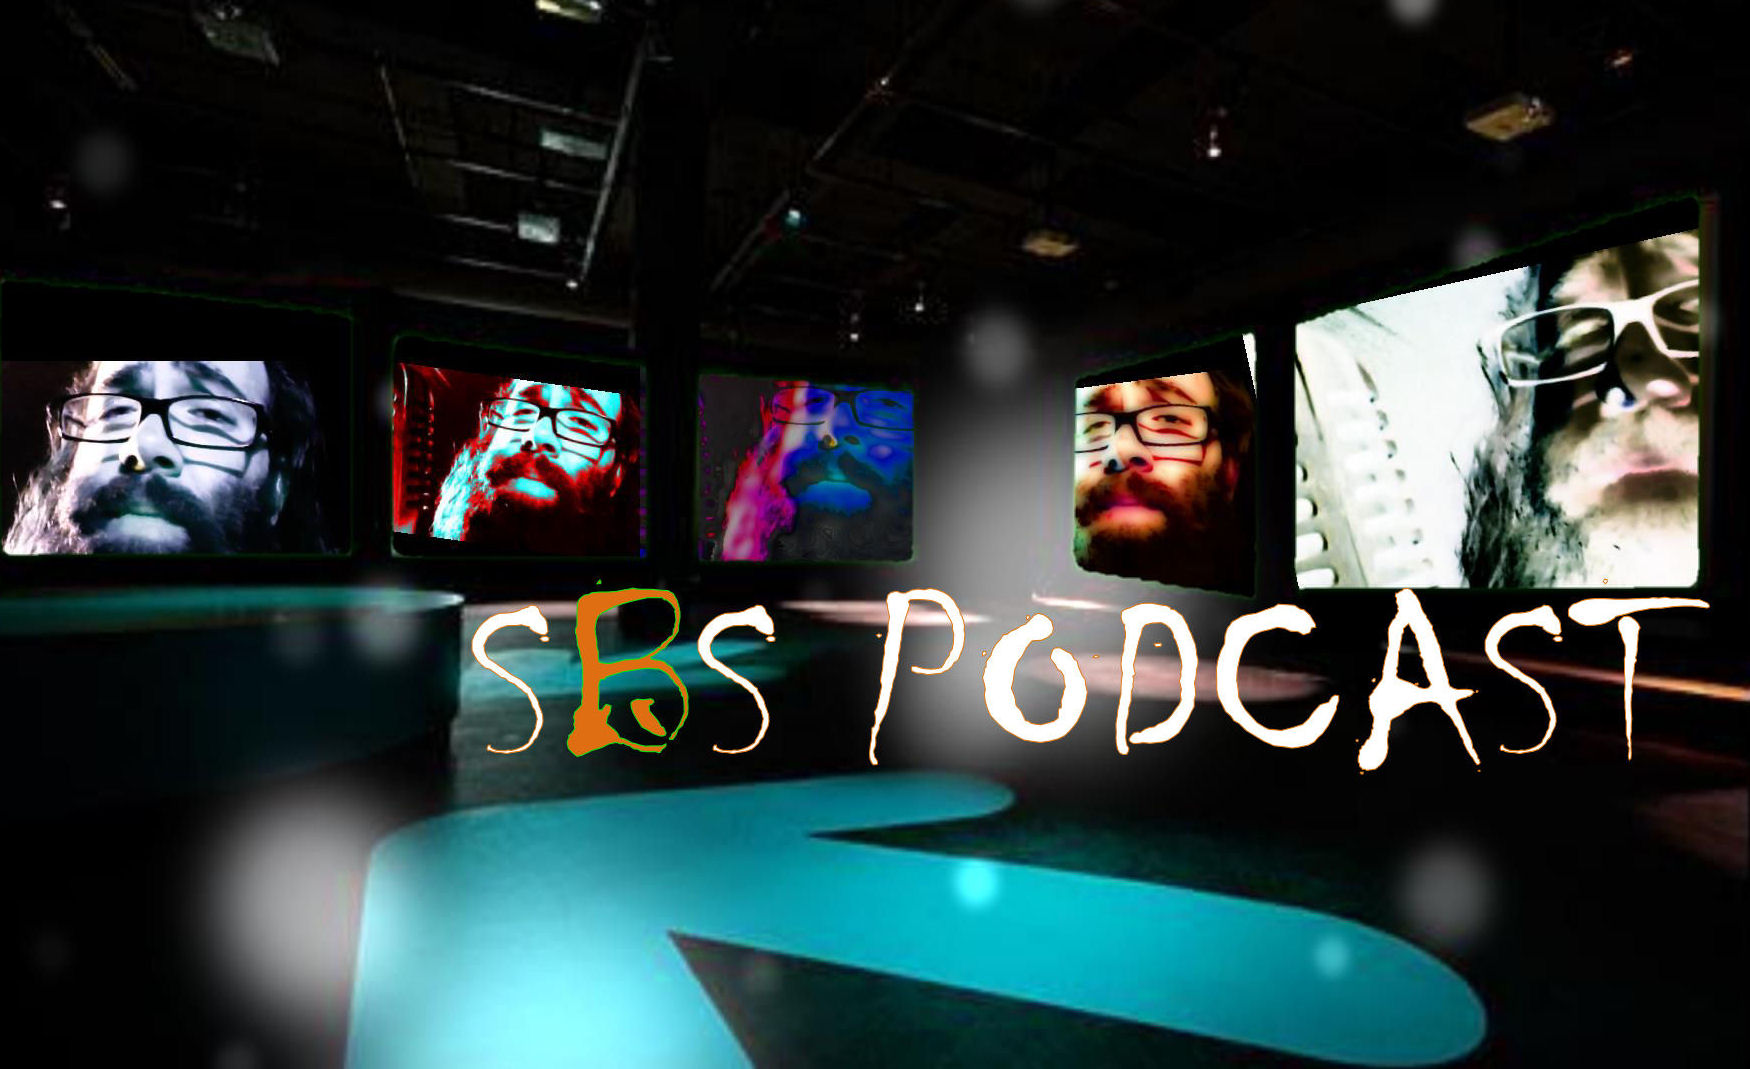  SBS Podcast 002